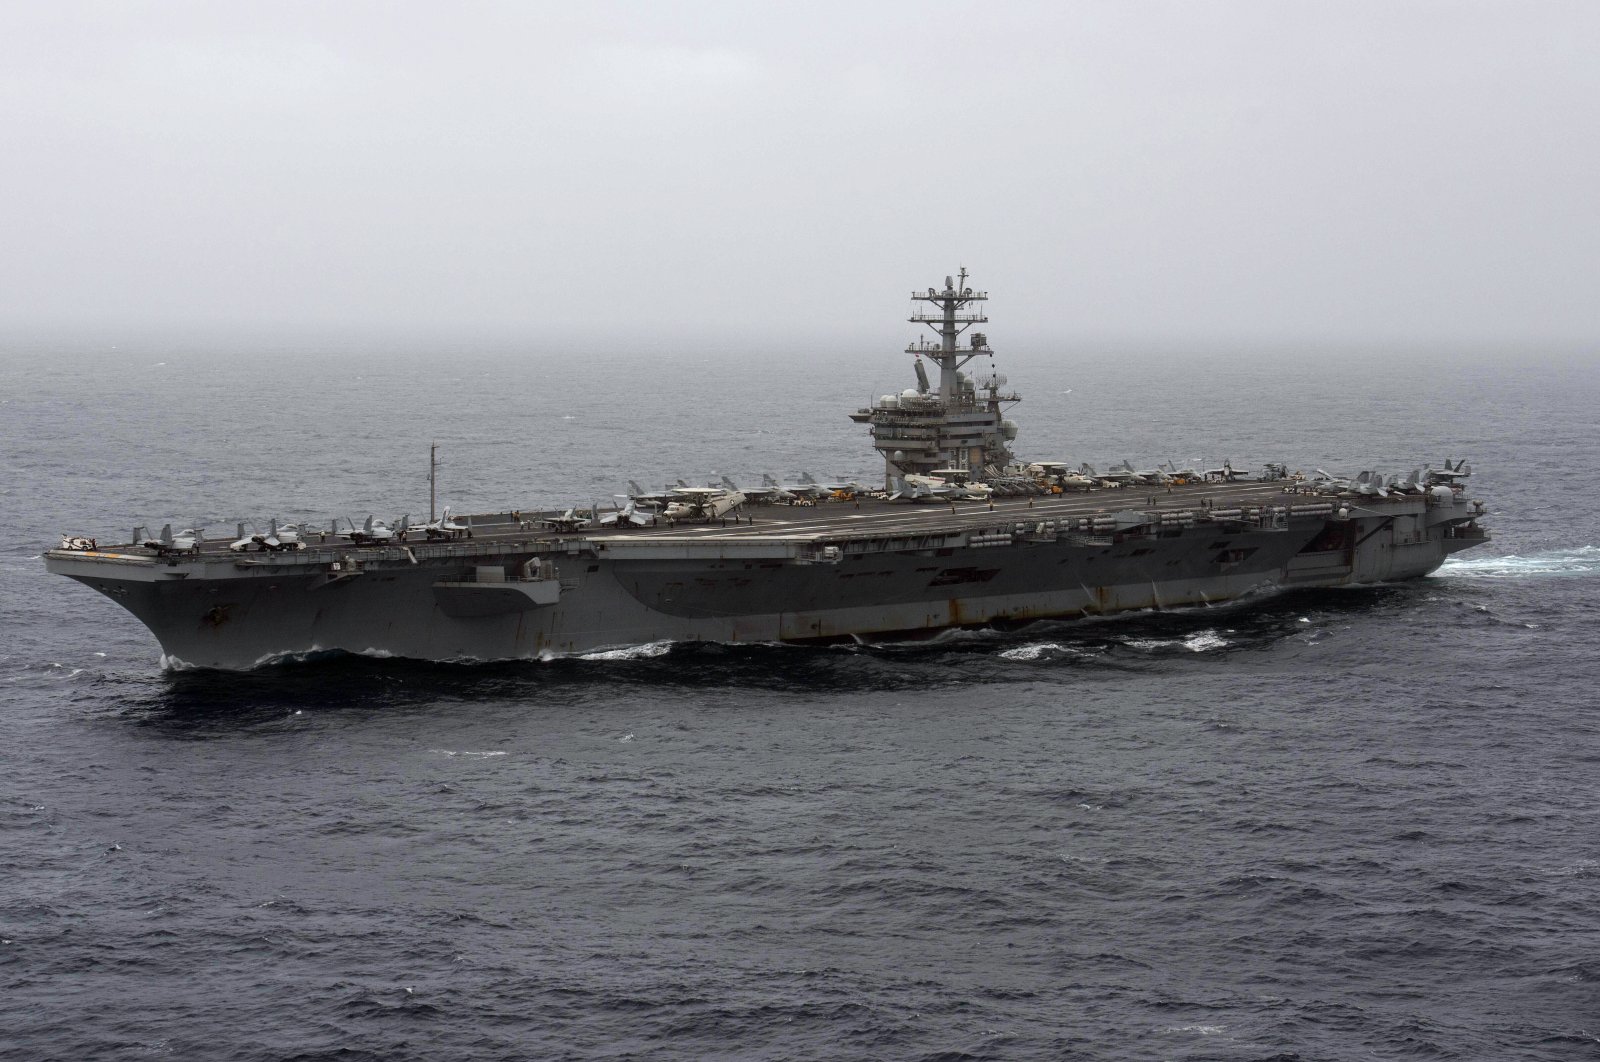 In this Sept. 7, 2020, file photo released by the U.S. Navy, the aircraft carrier USS Nimitz transits the Arabian Sea. The Pentagon announced Thursday, Dec. 31, 2020, that the USS Nimitz, the only Navy aircraft carrier operating in the Middle East, will return home to the U.S. West Coast. (Mass Communication Specialist 3rd Class Elliot Schaudt / U.S. Navy via AP)